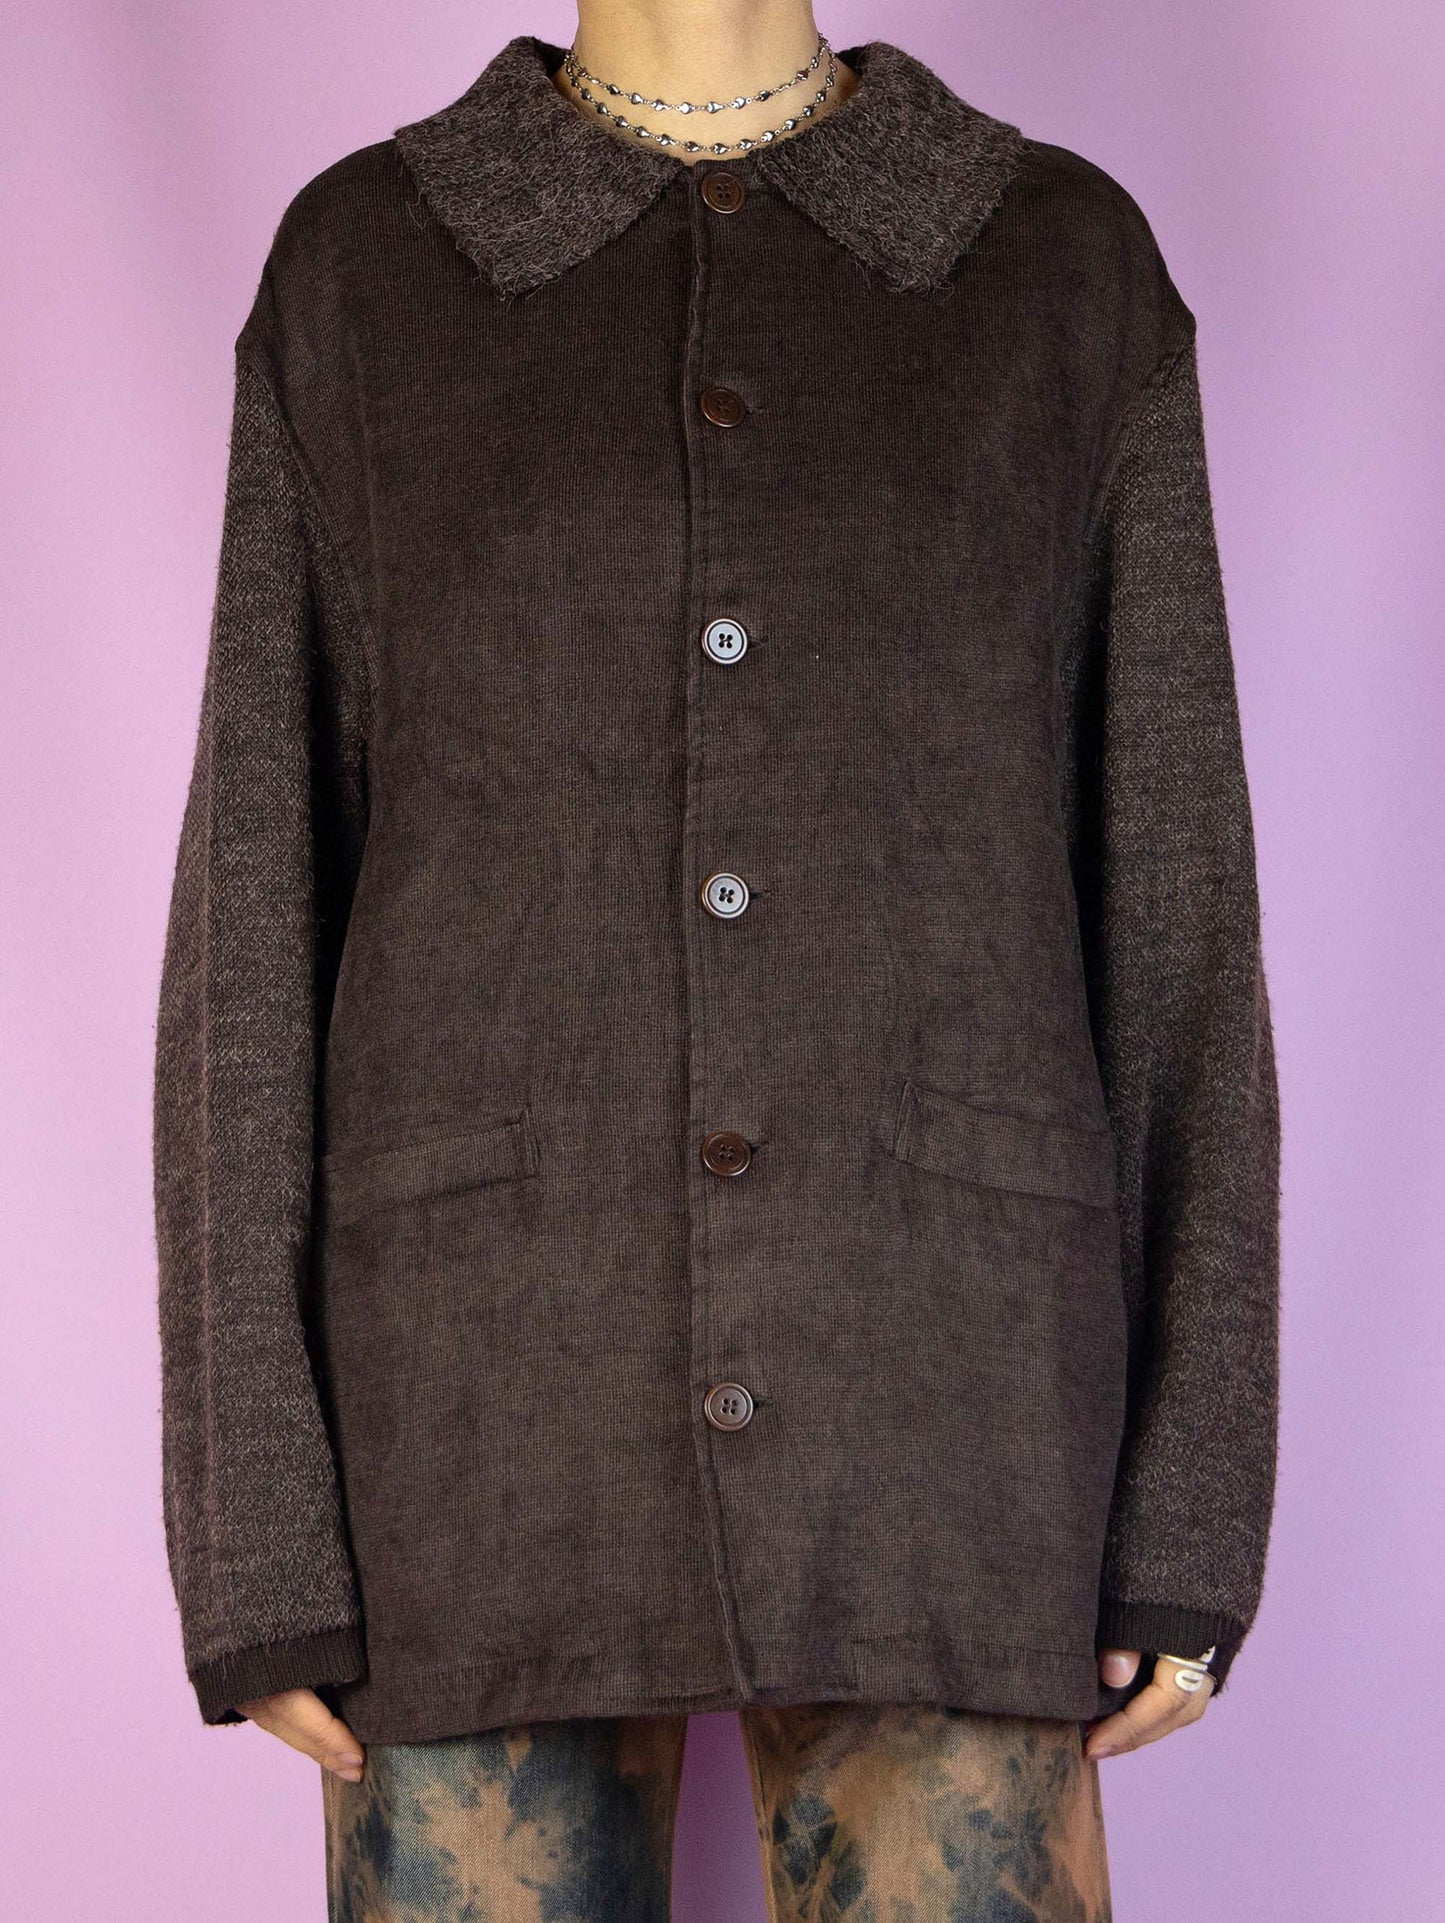 The Vintage 90s Dark Brown Knit Overshirt is a brown knitted collared overshirt with button closure and pockets. Classic retro preppy style 1990s dark academia jacket.